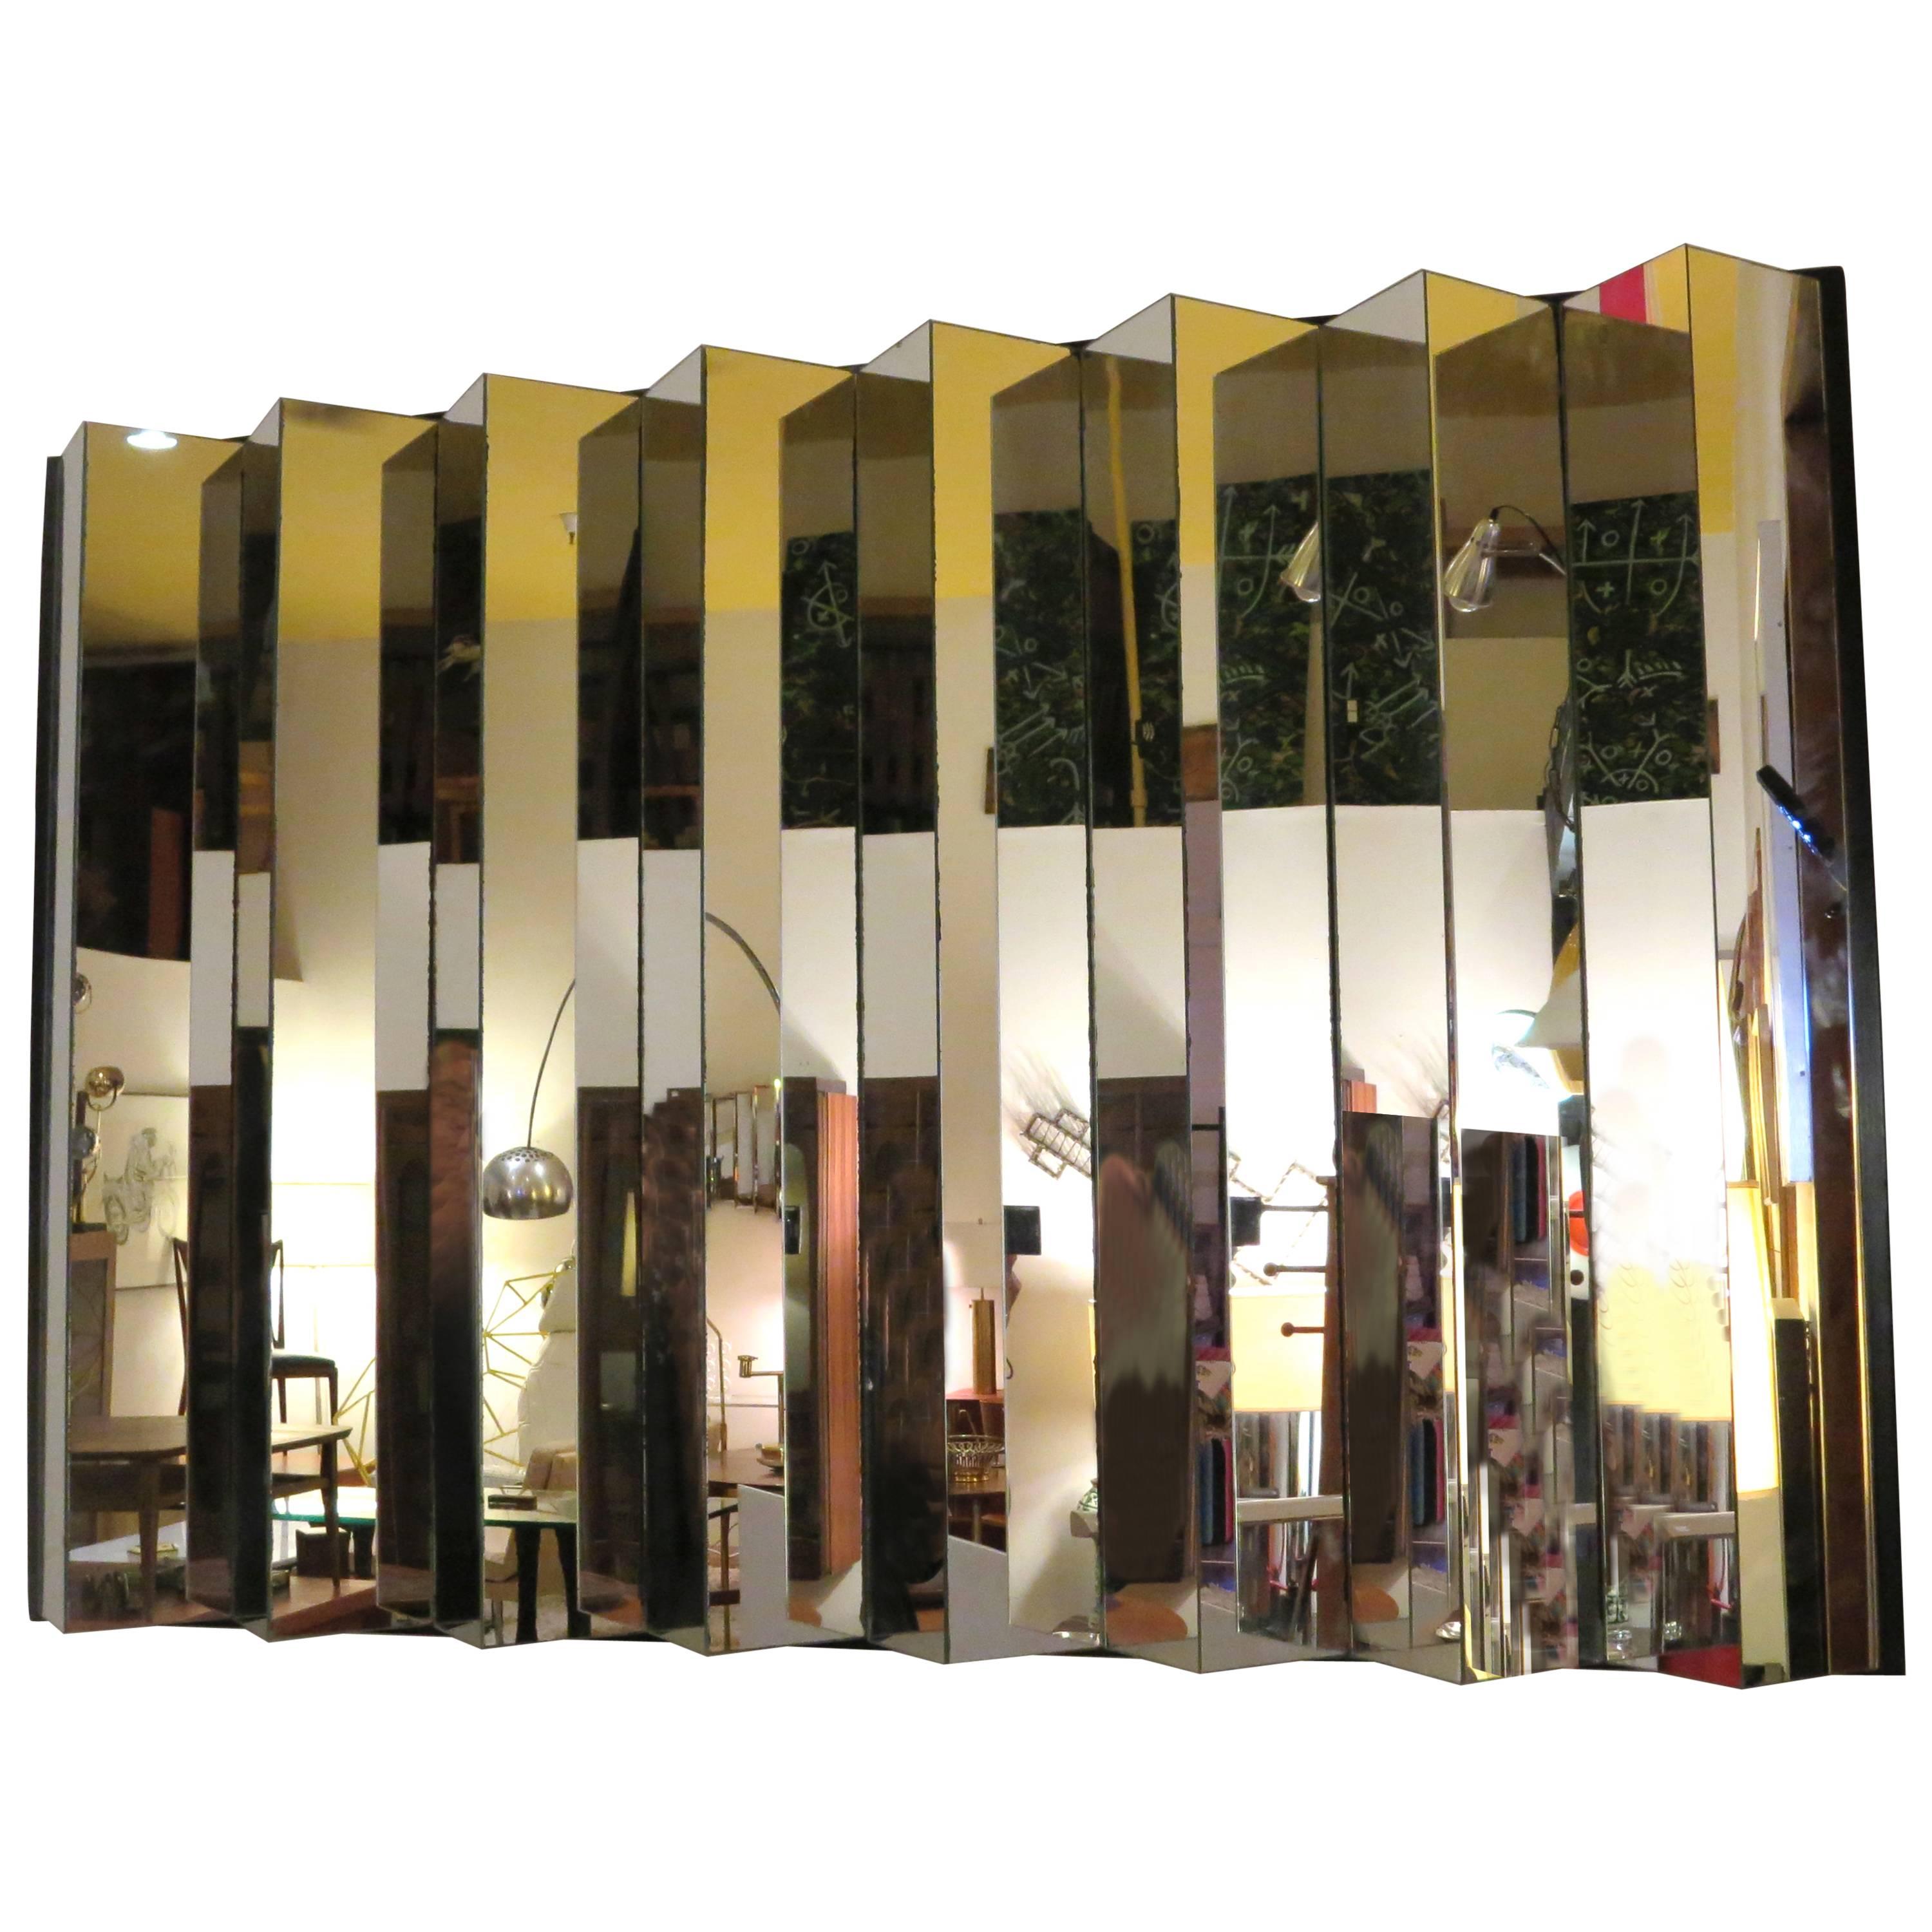 Striking, 1970s Zig-Zag Multifaceted Large Mirror Pop Space Age